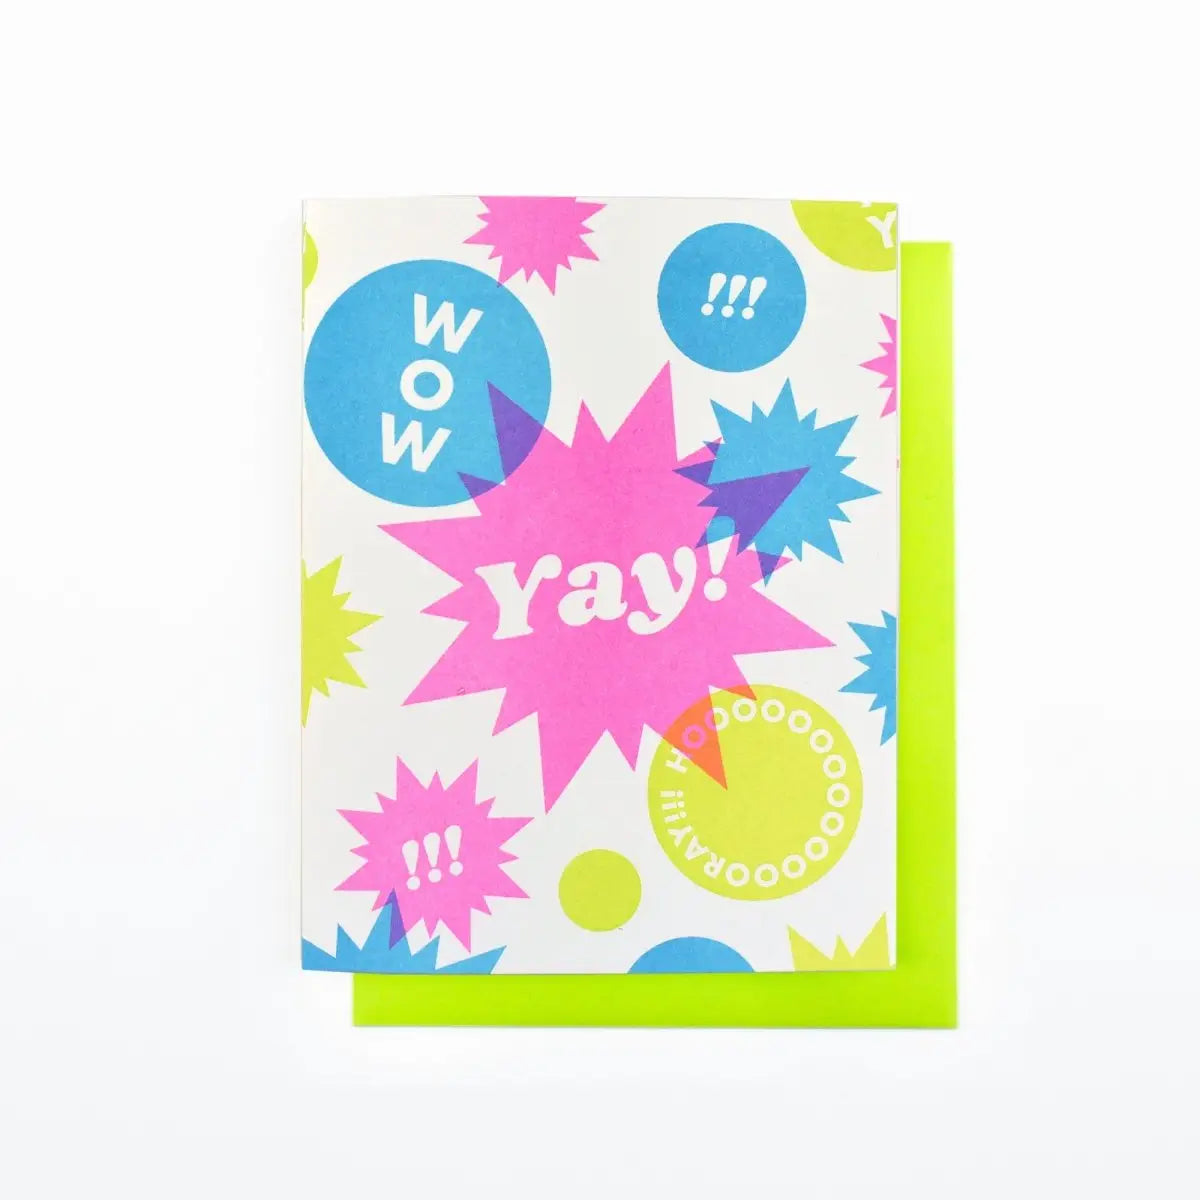 White card with blue, pink, and lime green circles and stars. White text reads "wow," "yay," !!!," "and "hooray!" 